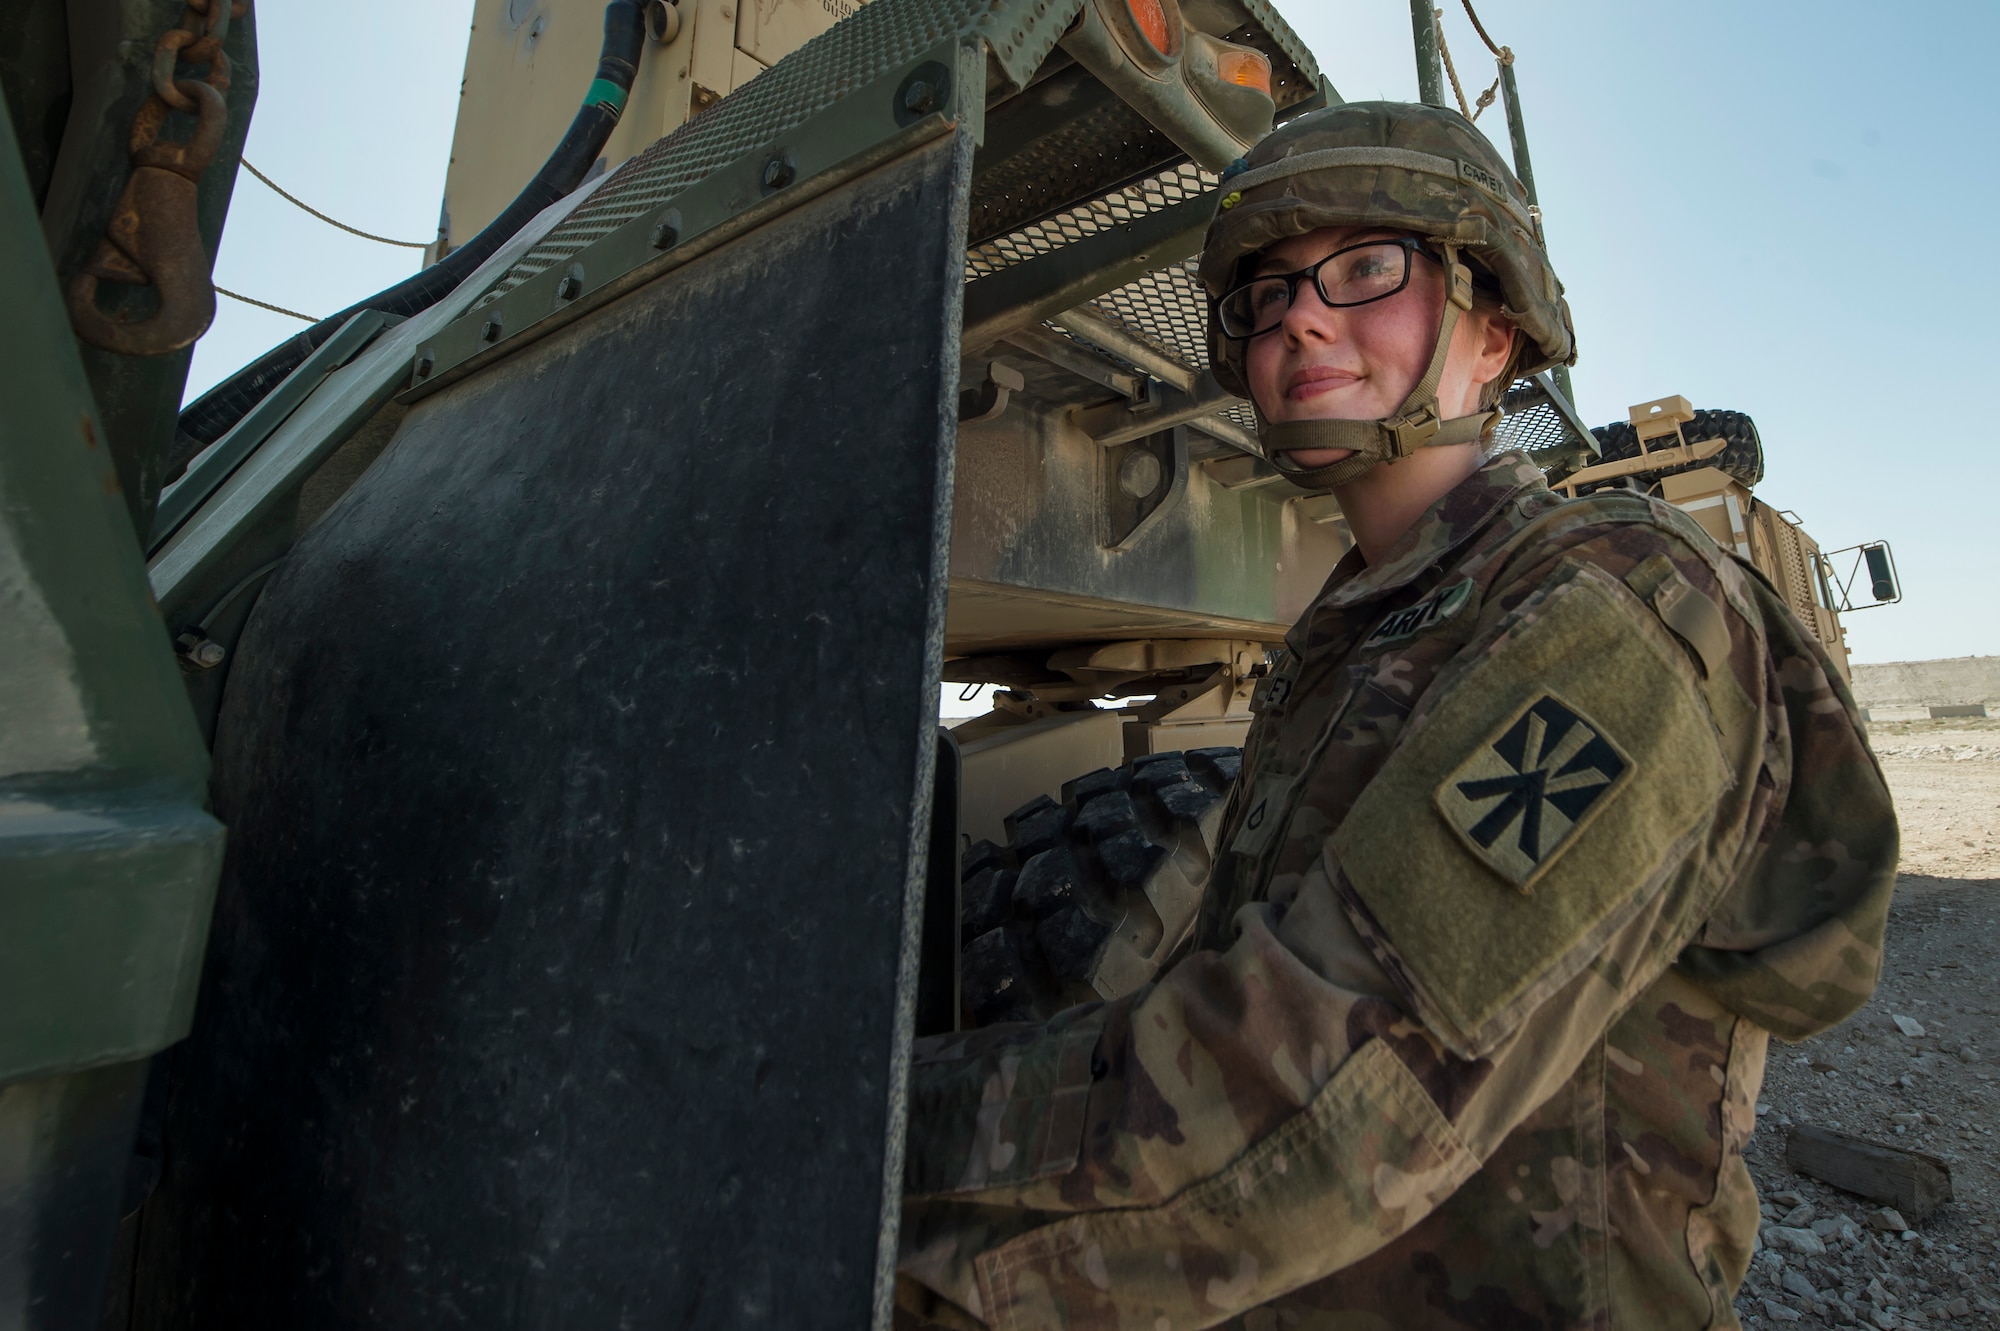 U.S. Army Pfc. Abbigail Carey, Charlie Company, 1st Battalion, 43rd Air Defense Artillery (ADA) Battalion, 11th ADA Brigade patriot missile maintainer and operator, performs patriot missile readiness drills at Al Udeid Air Base, Qatar, April 16, 2019. Soldiers of the 1-43rd ADA Battalion provide the installation with an air defense capability, protecting personnel, assets and operations here from potential air threats. (U.S. Air Force photo by Tech. Sgt. Christopher Hubenthal)